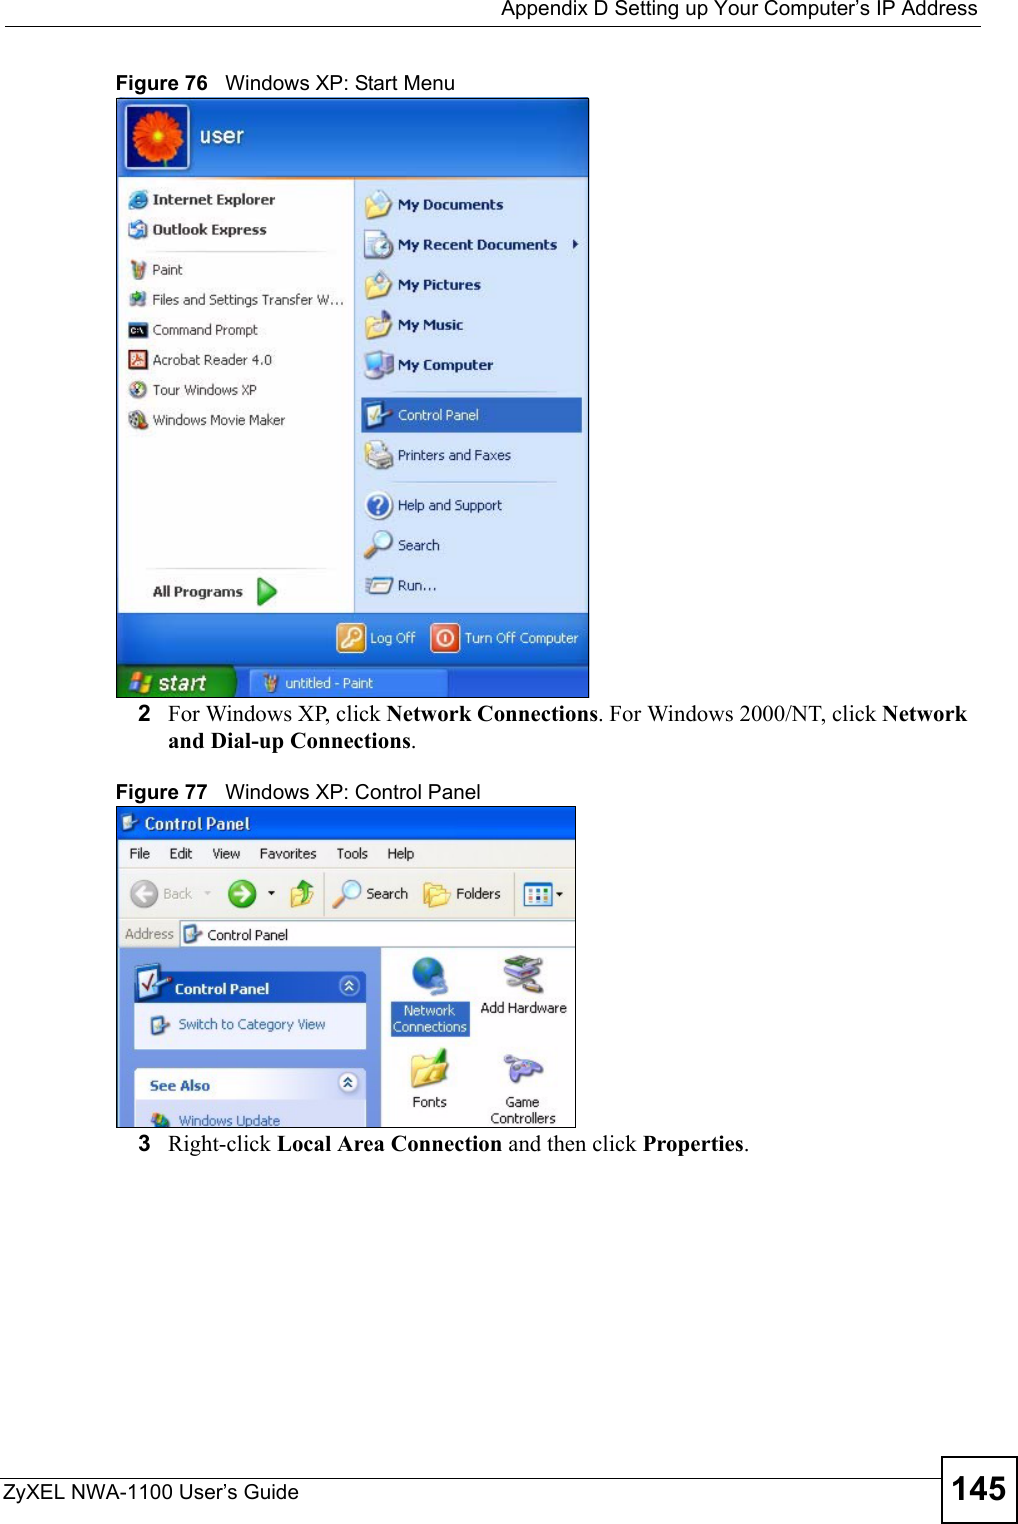  Appendix D Setting up Your Computer’s IP AddressZyXEL NWA-1100 User’s Guide 145Figure 76   Windows XP: Start Menu2For Windows XP, click Network Connections. For Windows 2000/NT, click Network and Dial-up Connections.Figure 77   Windows XP: Control Panel3Right-click Local Area Connection and then click Properties.